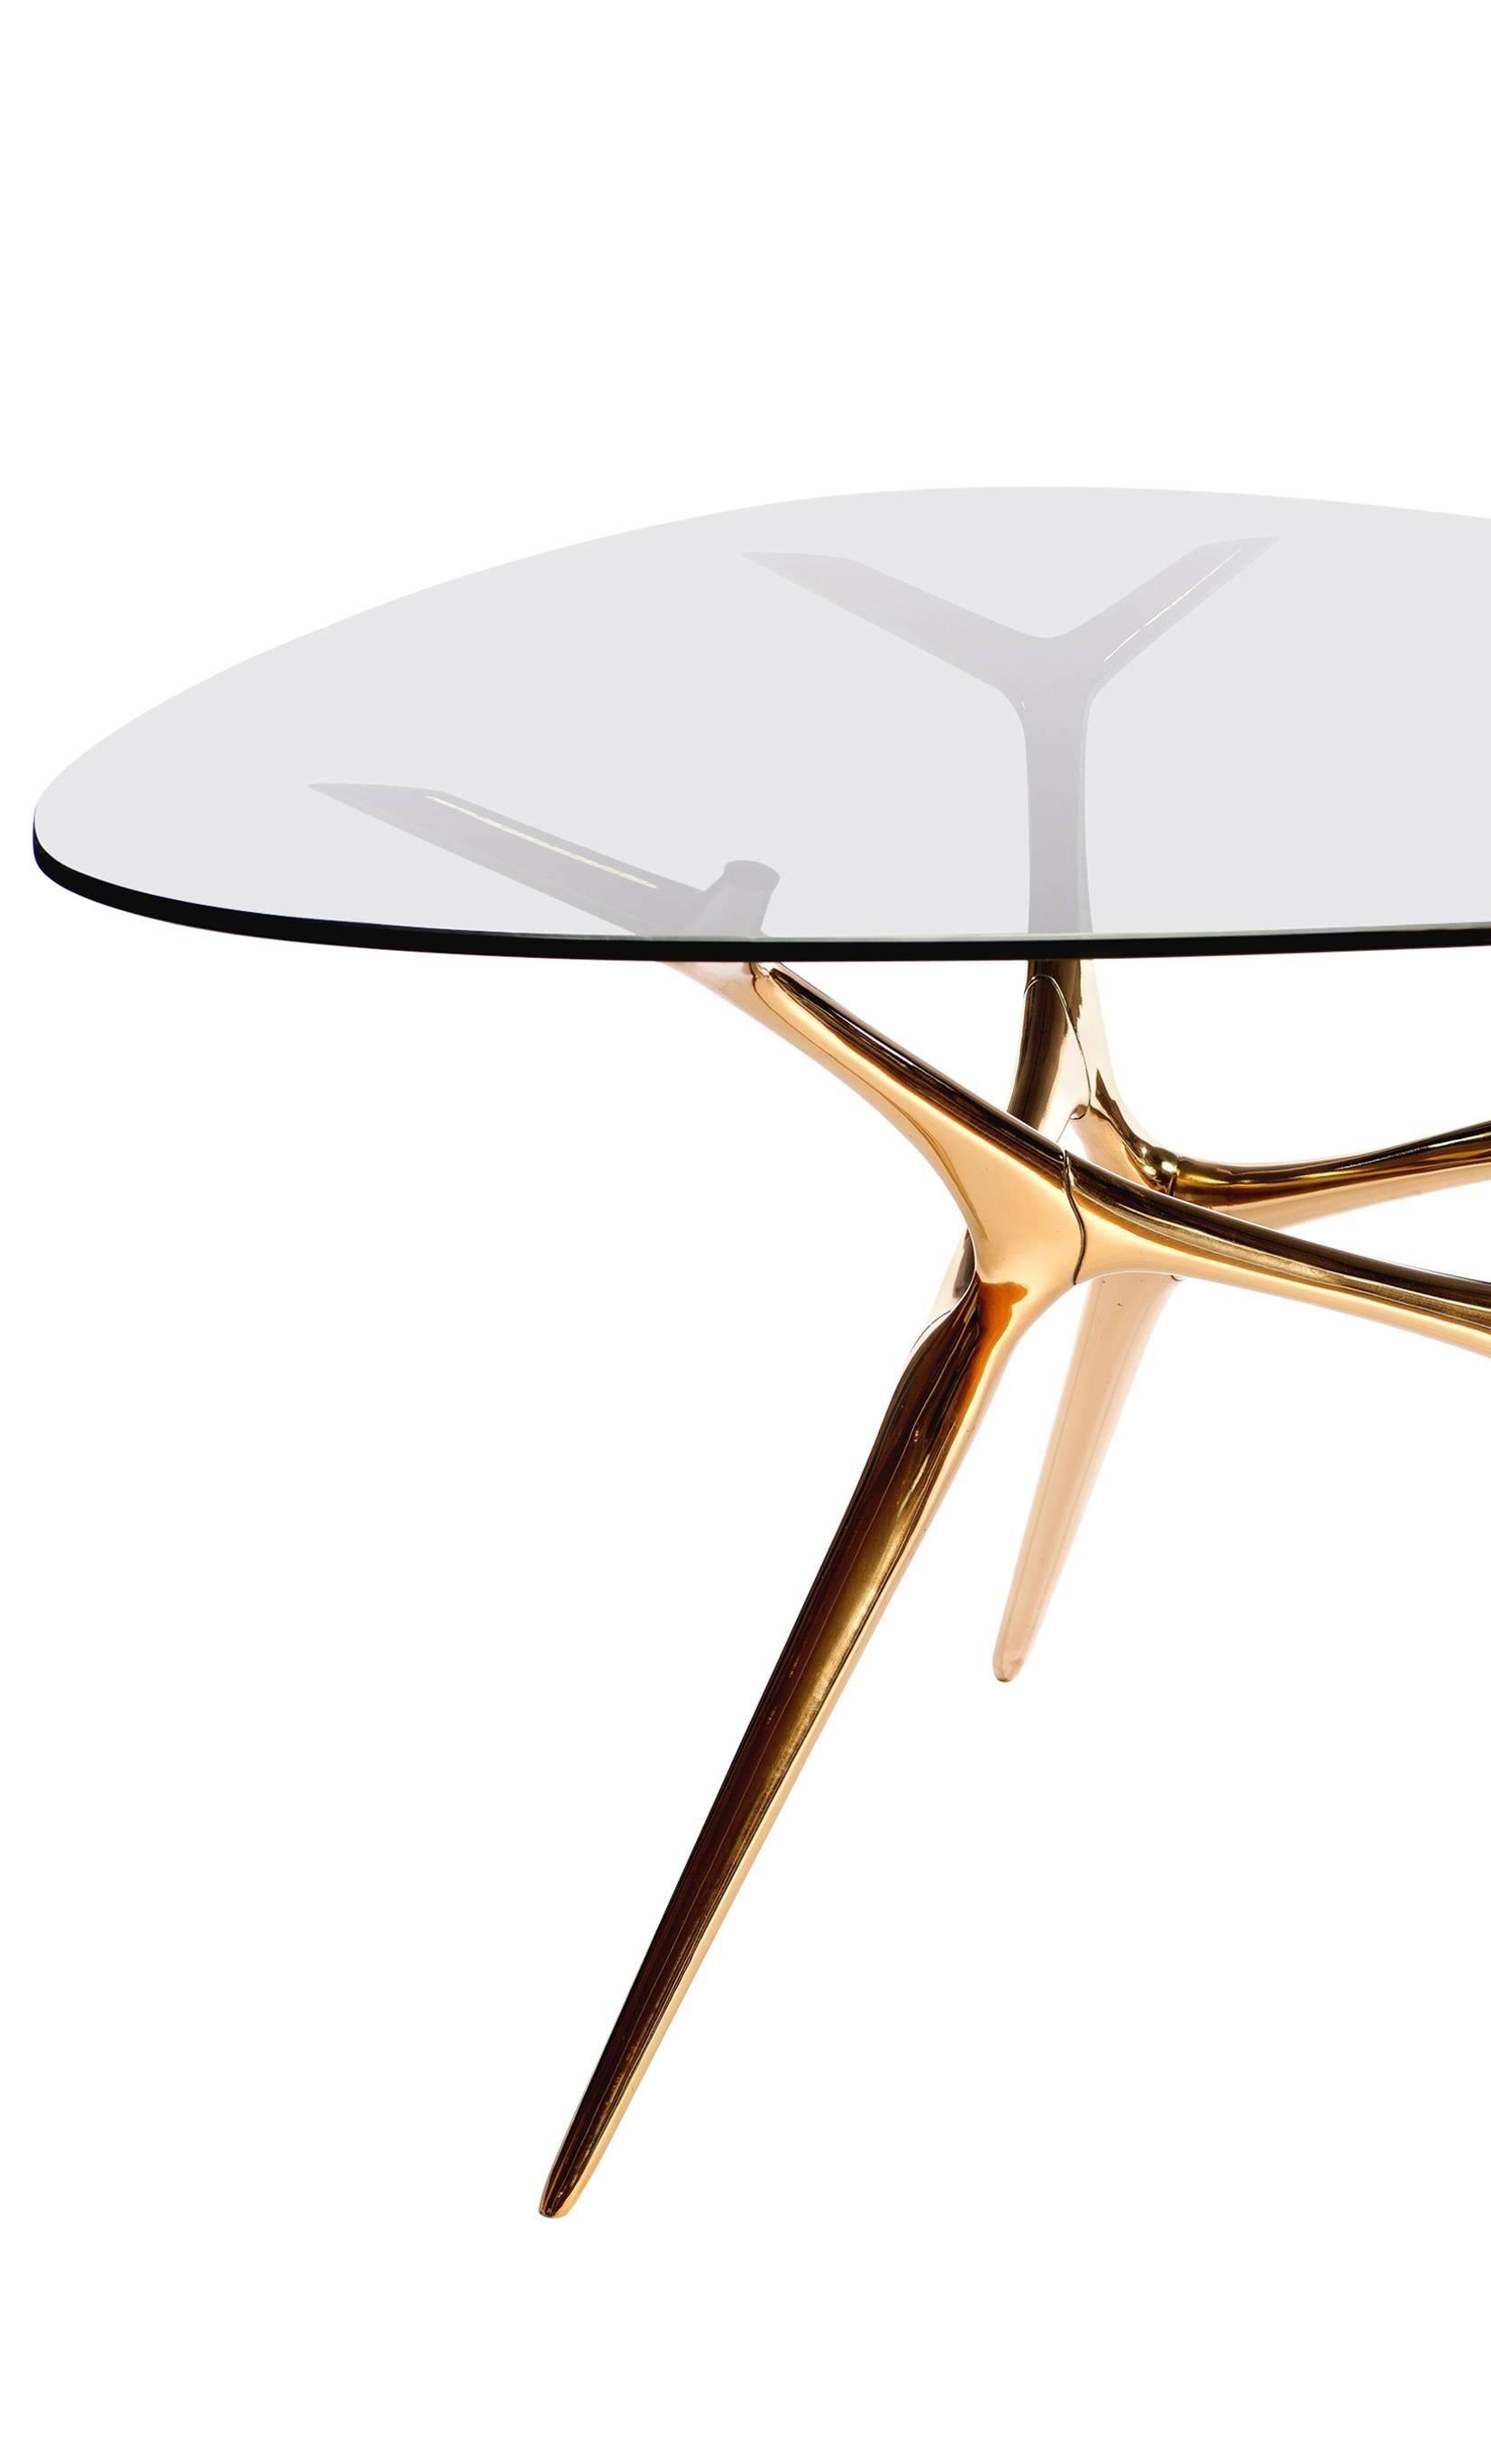 Contemporary E-Volved Table by Timothy Schreiber